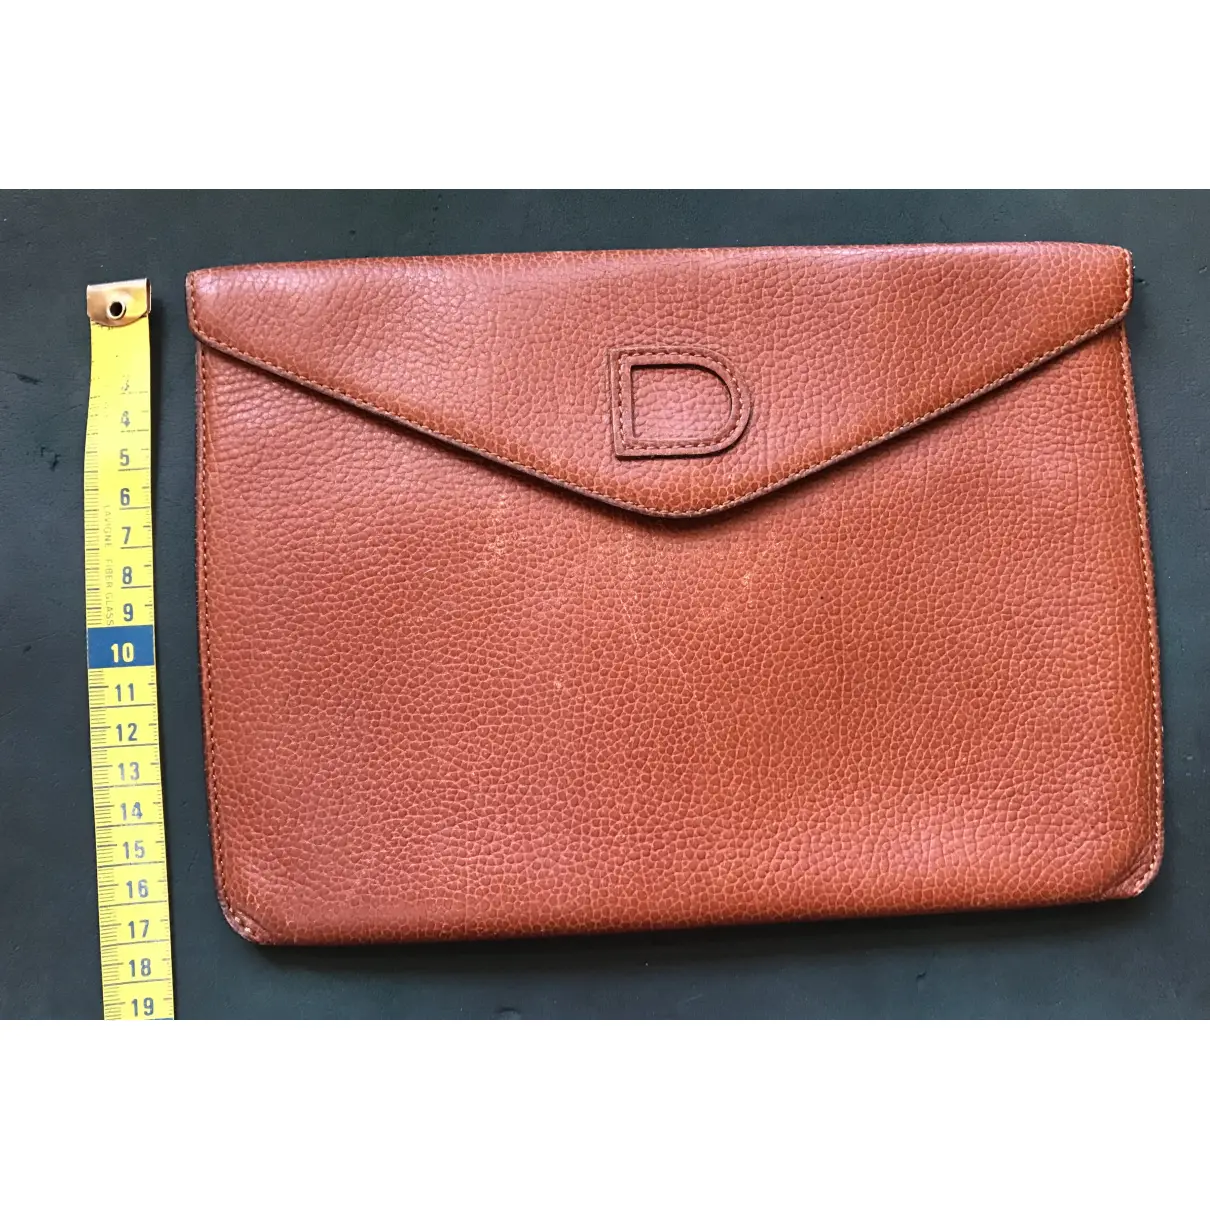 Leather clutch bag Delvaux